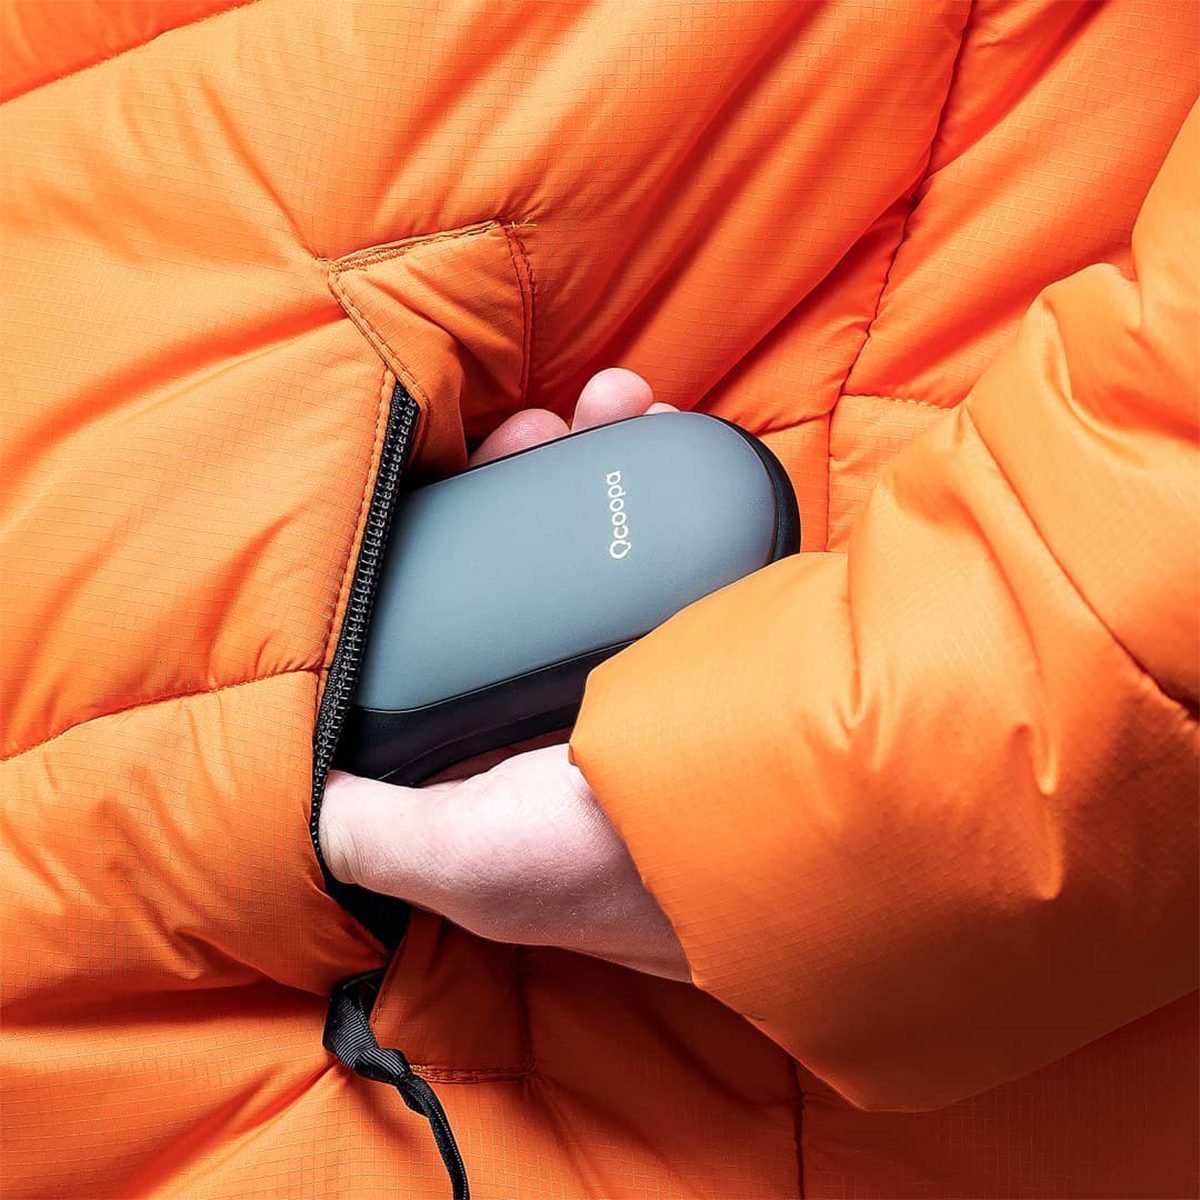 Over 26,000 People Are Raving About This Rechargeable Hand Warmer on Amazon